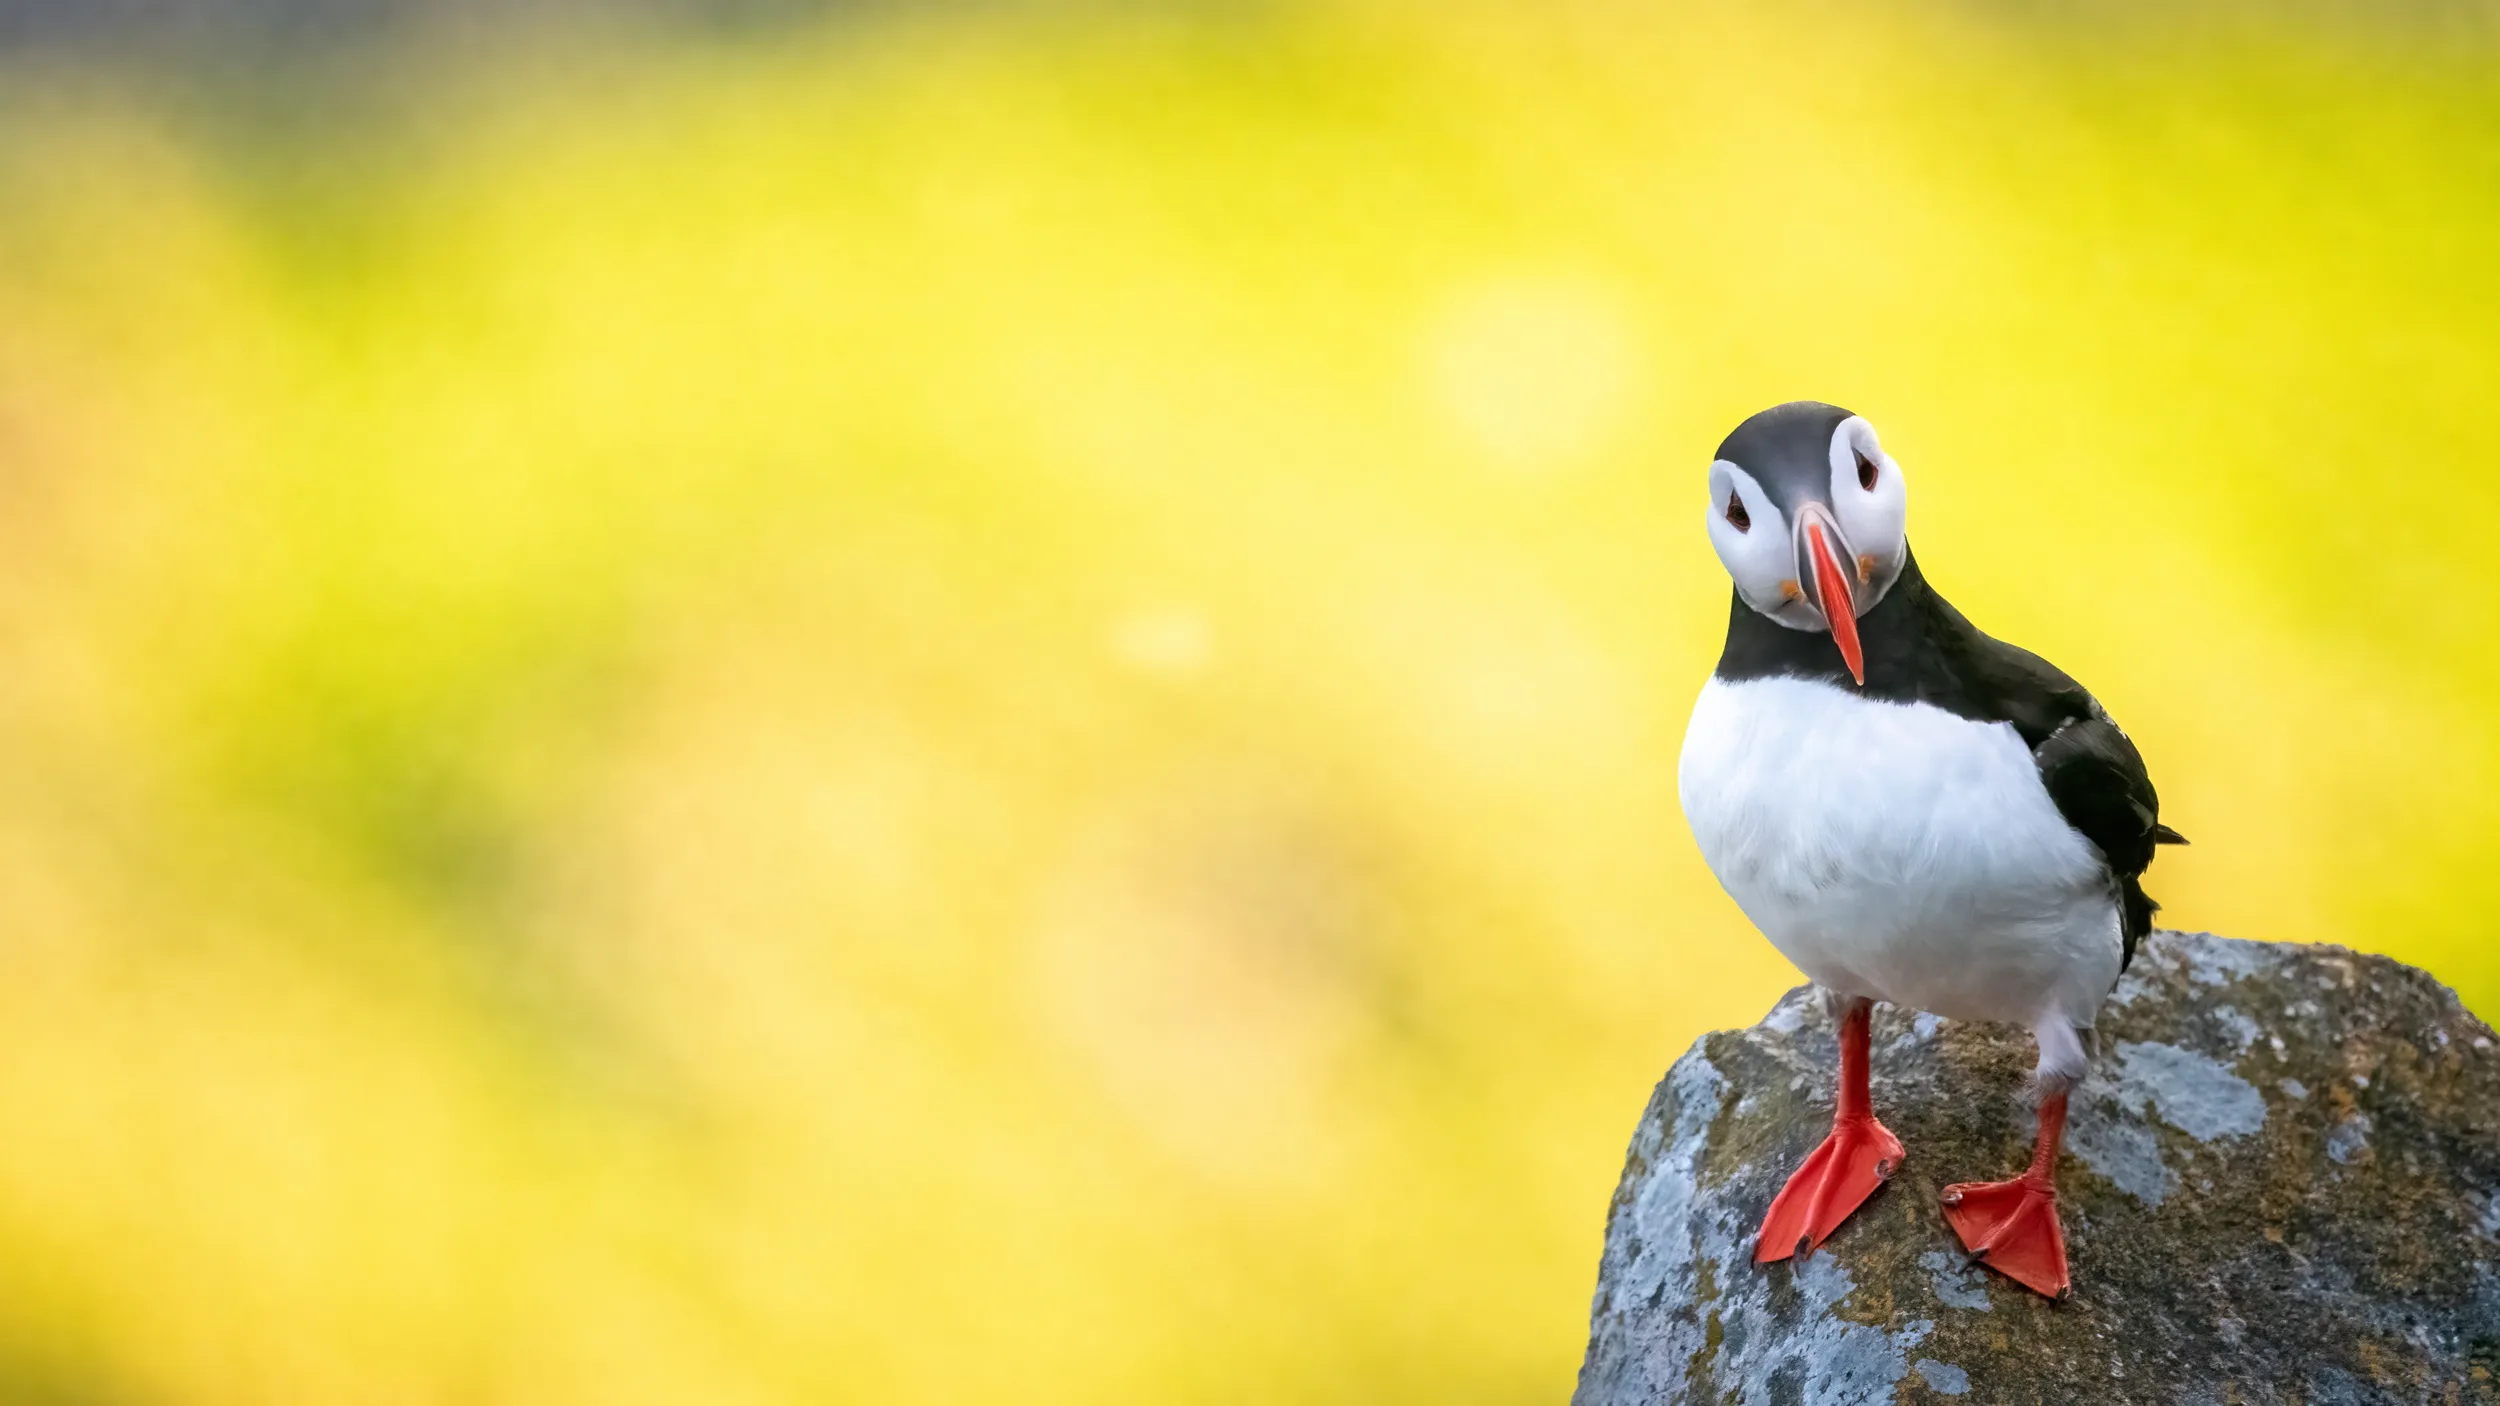 A Puffin stood on the edge of a rock looking inquisitively at the camera. 